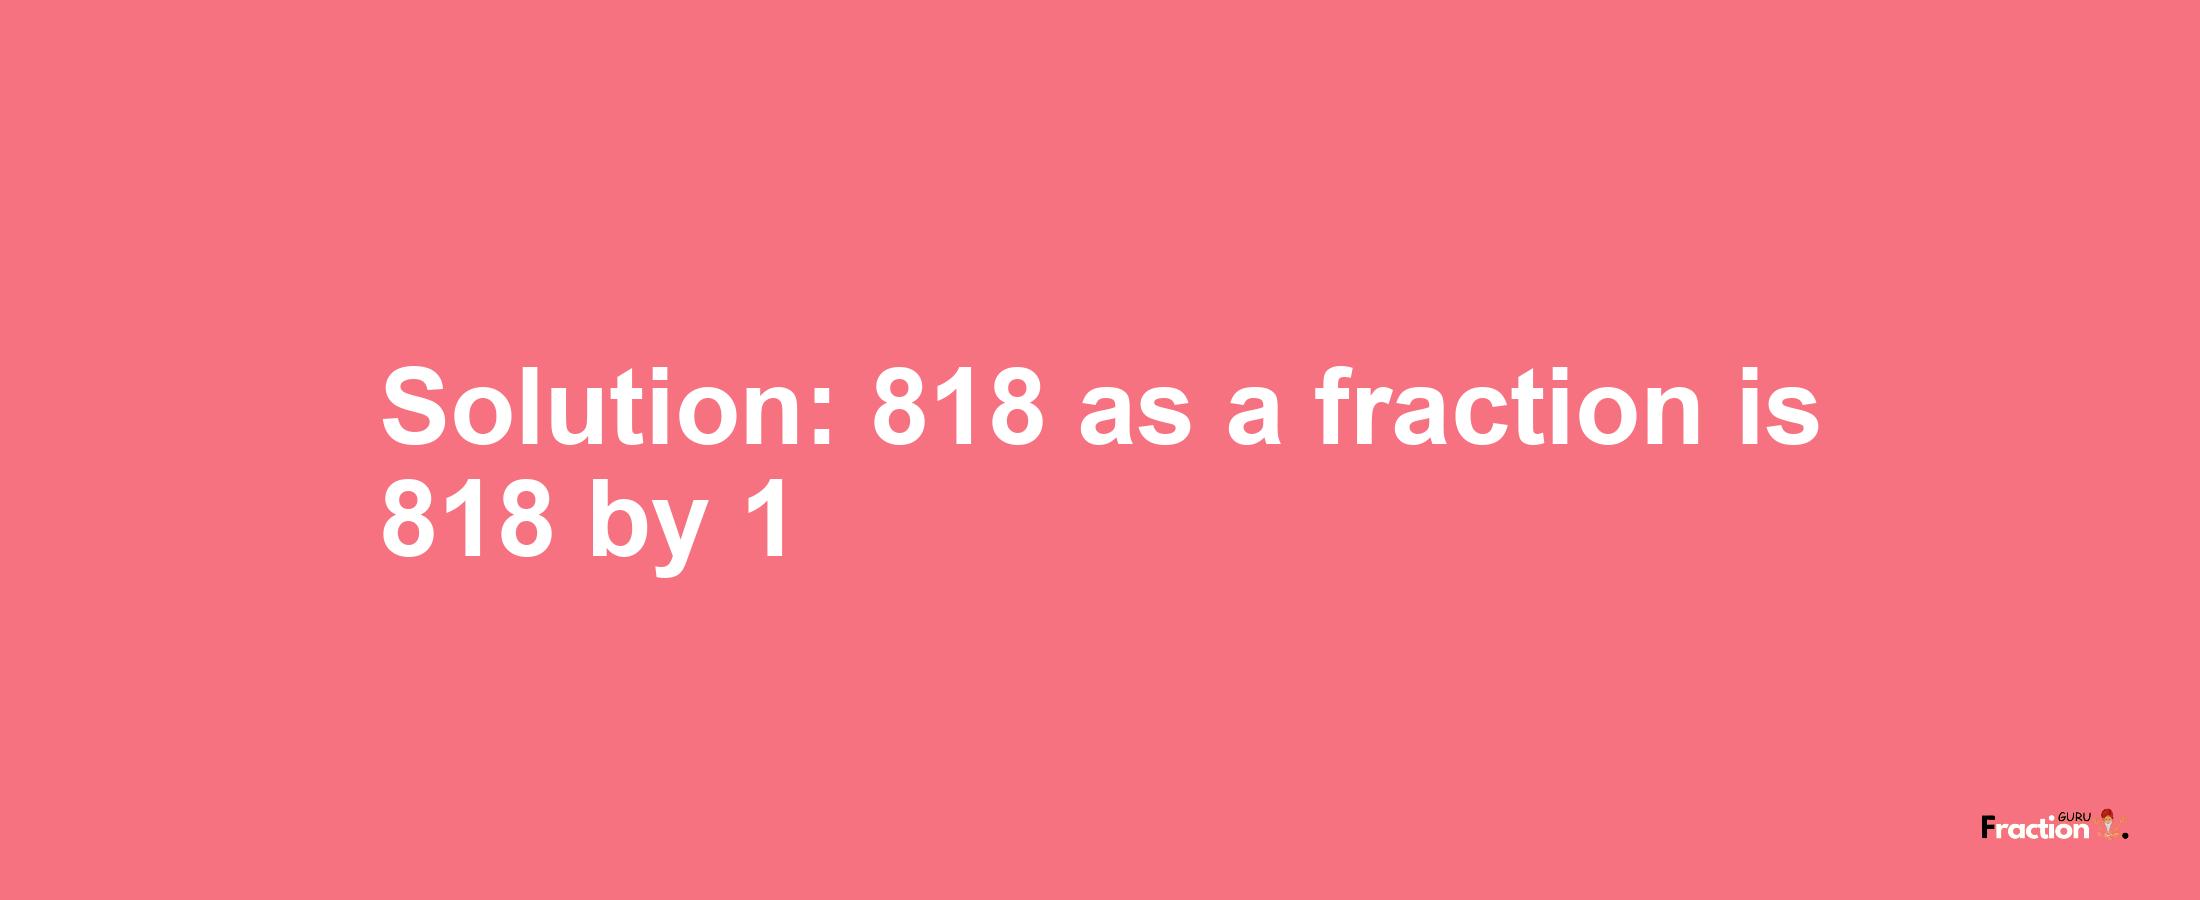 Solution:818 as a fraction is 818/1